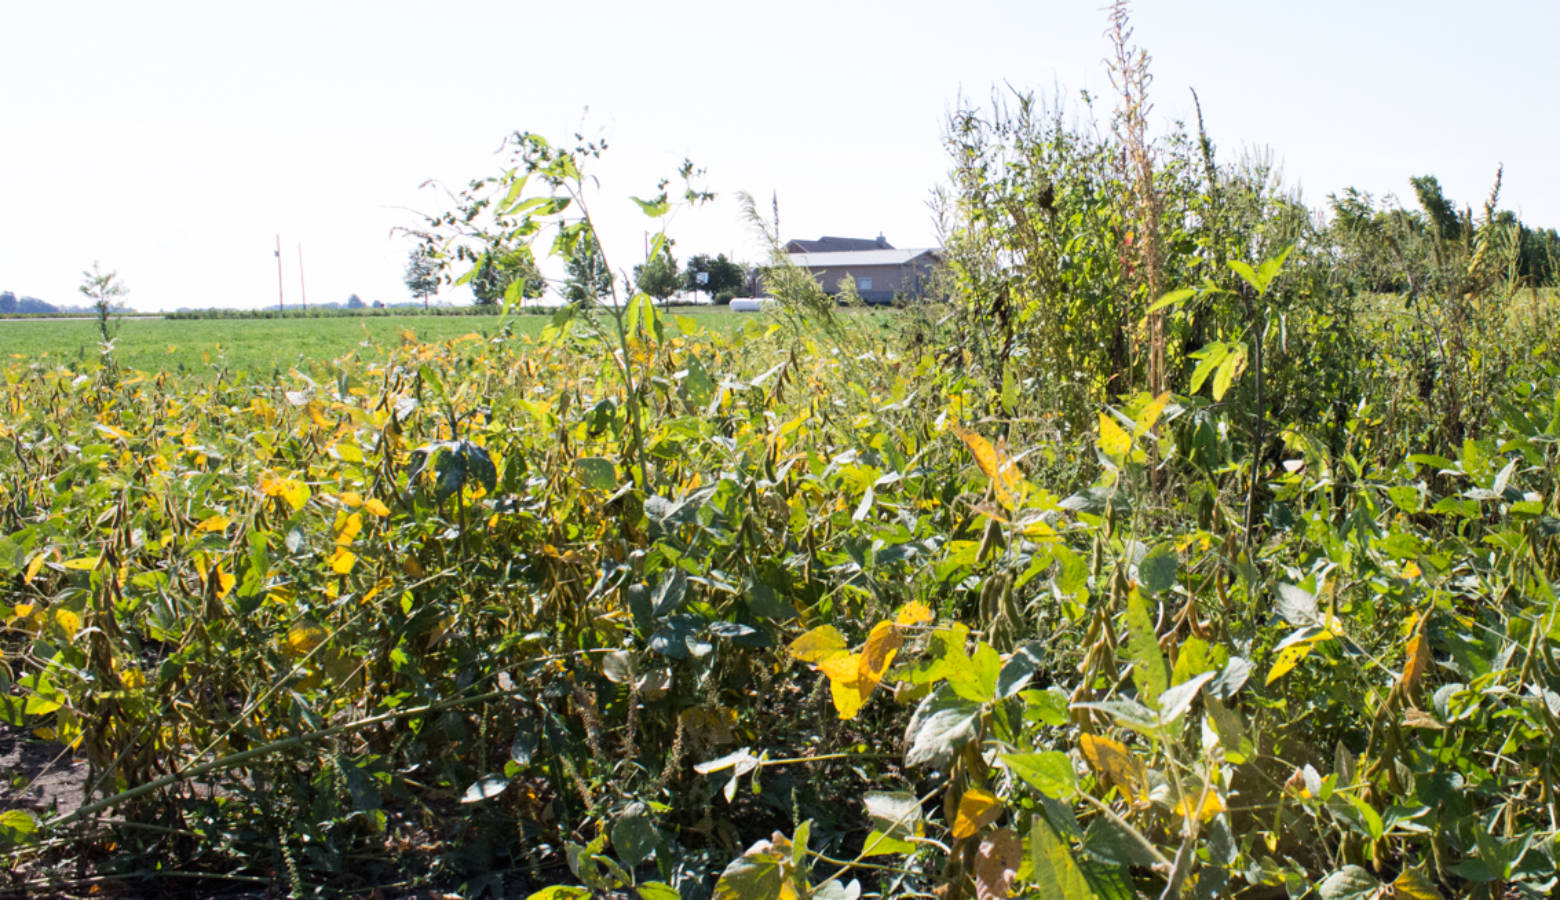 A glyphosate-resistant weed stands over over a patch of soybeans on Don Lamb's farm. Weeds like this are one reason some farmers turned to dicamba-tolerant soybeans this year. (Nick Janzen/IPB News)